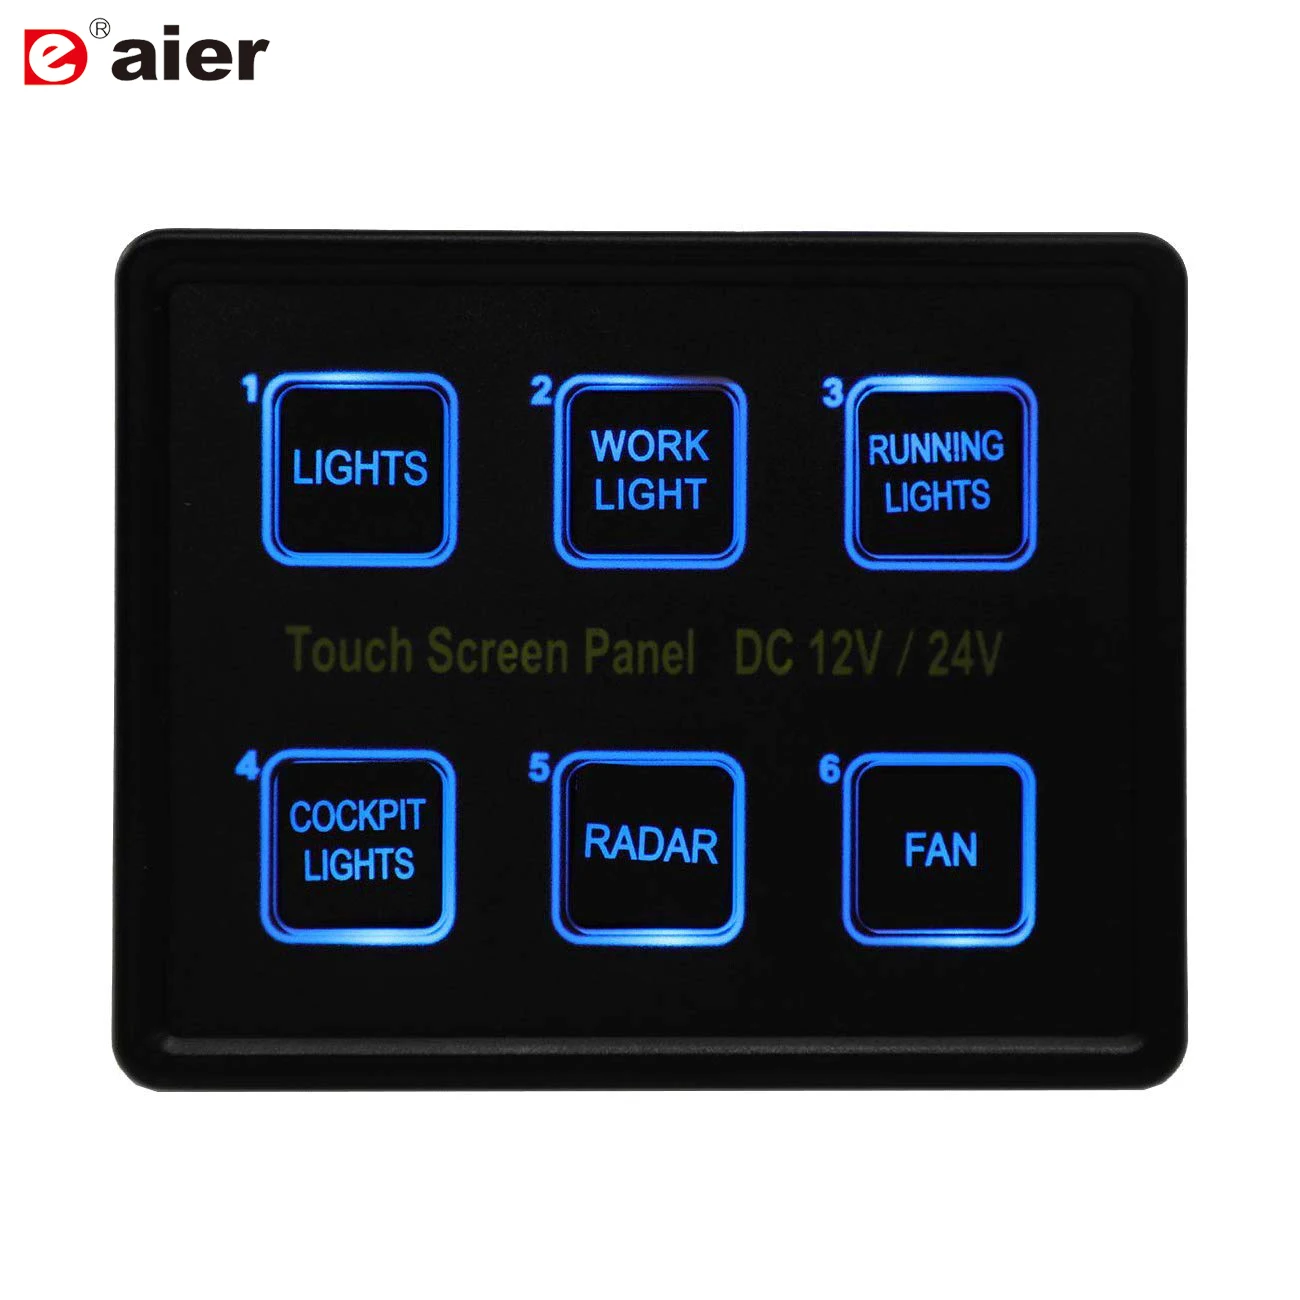 ELING 6 Gang Dual LED Light Switch Panel for Car Caravan Boat Car RV Yacht 12V/24V Universal Type Pre-Wired red 